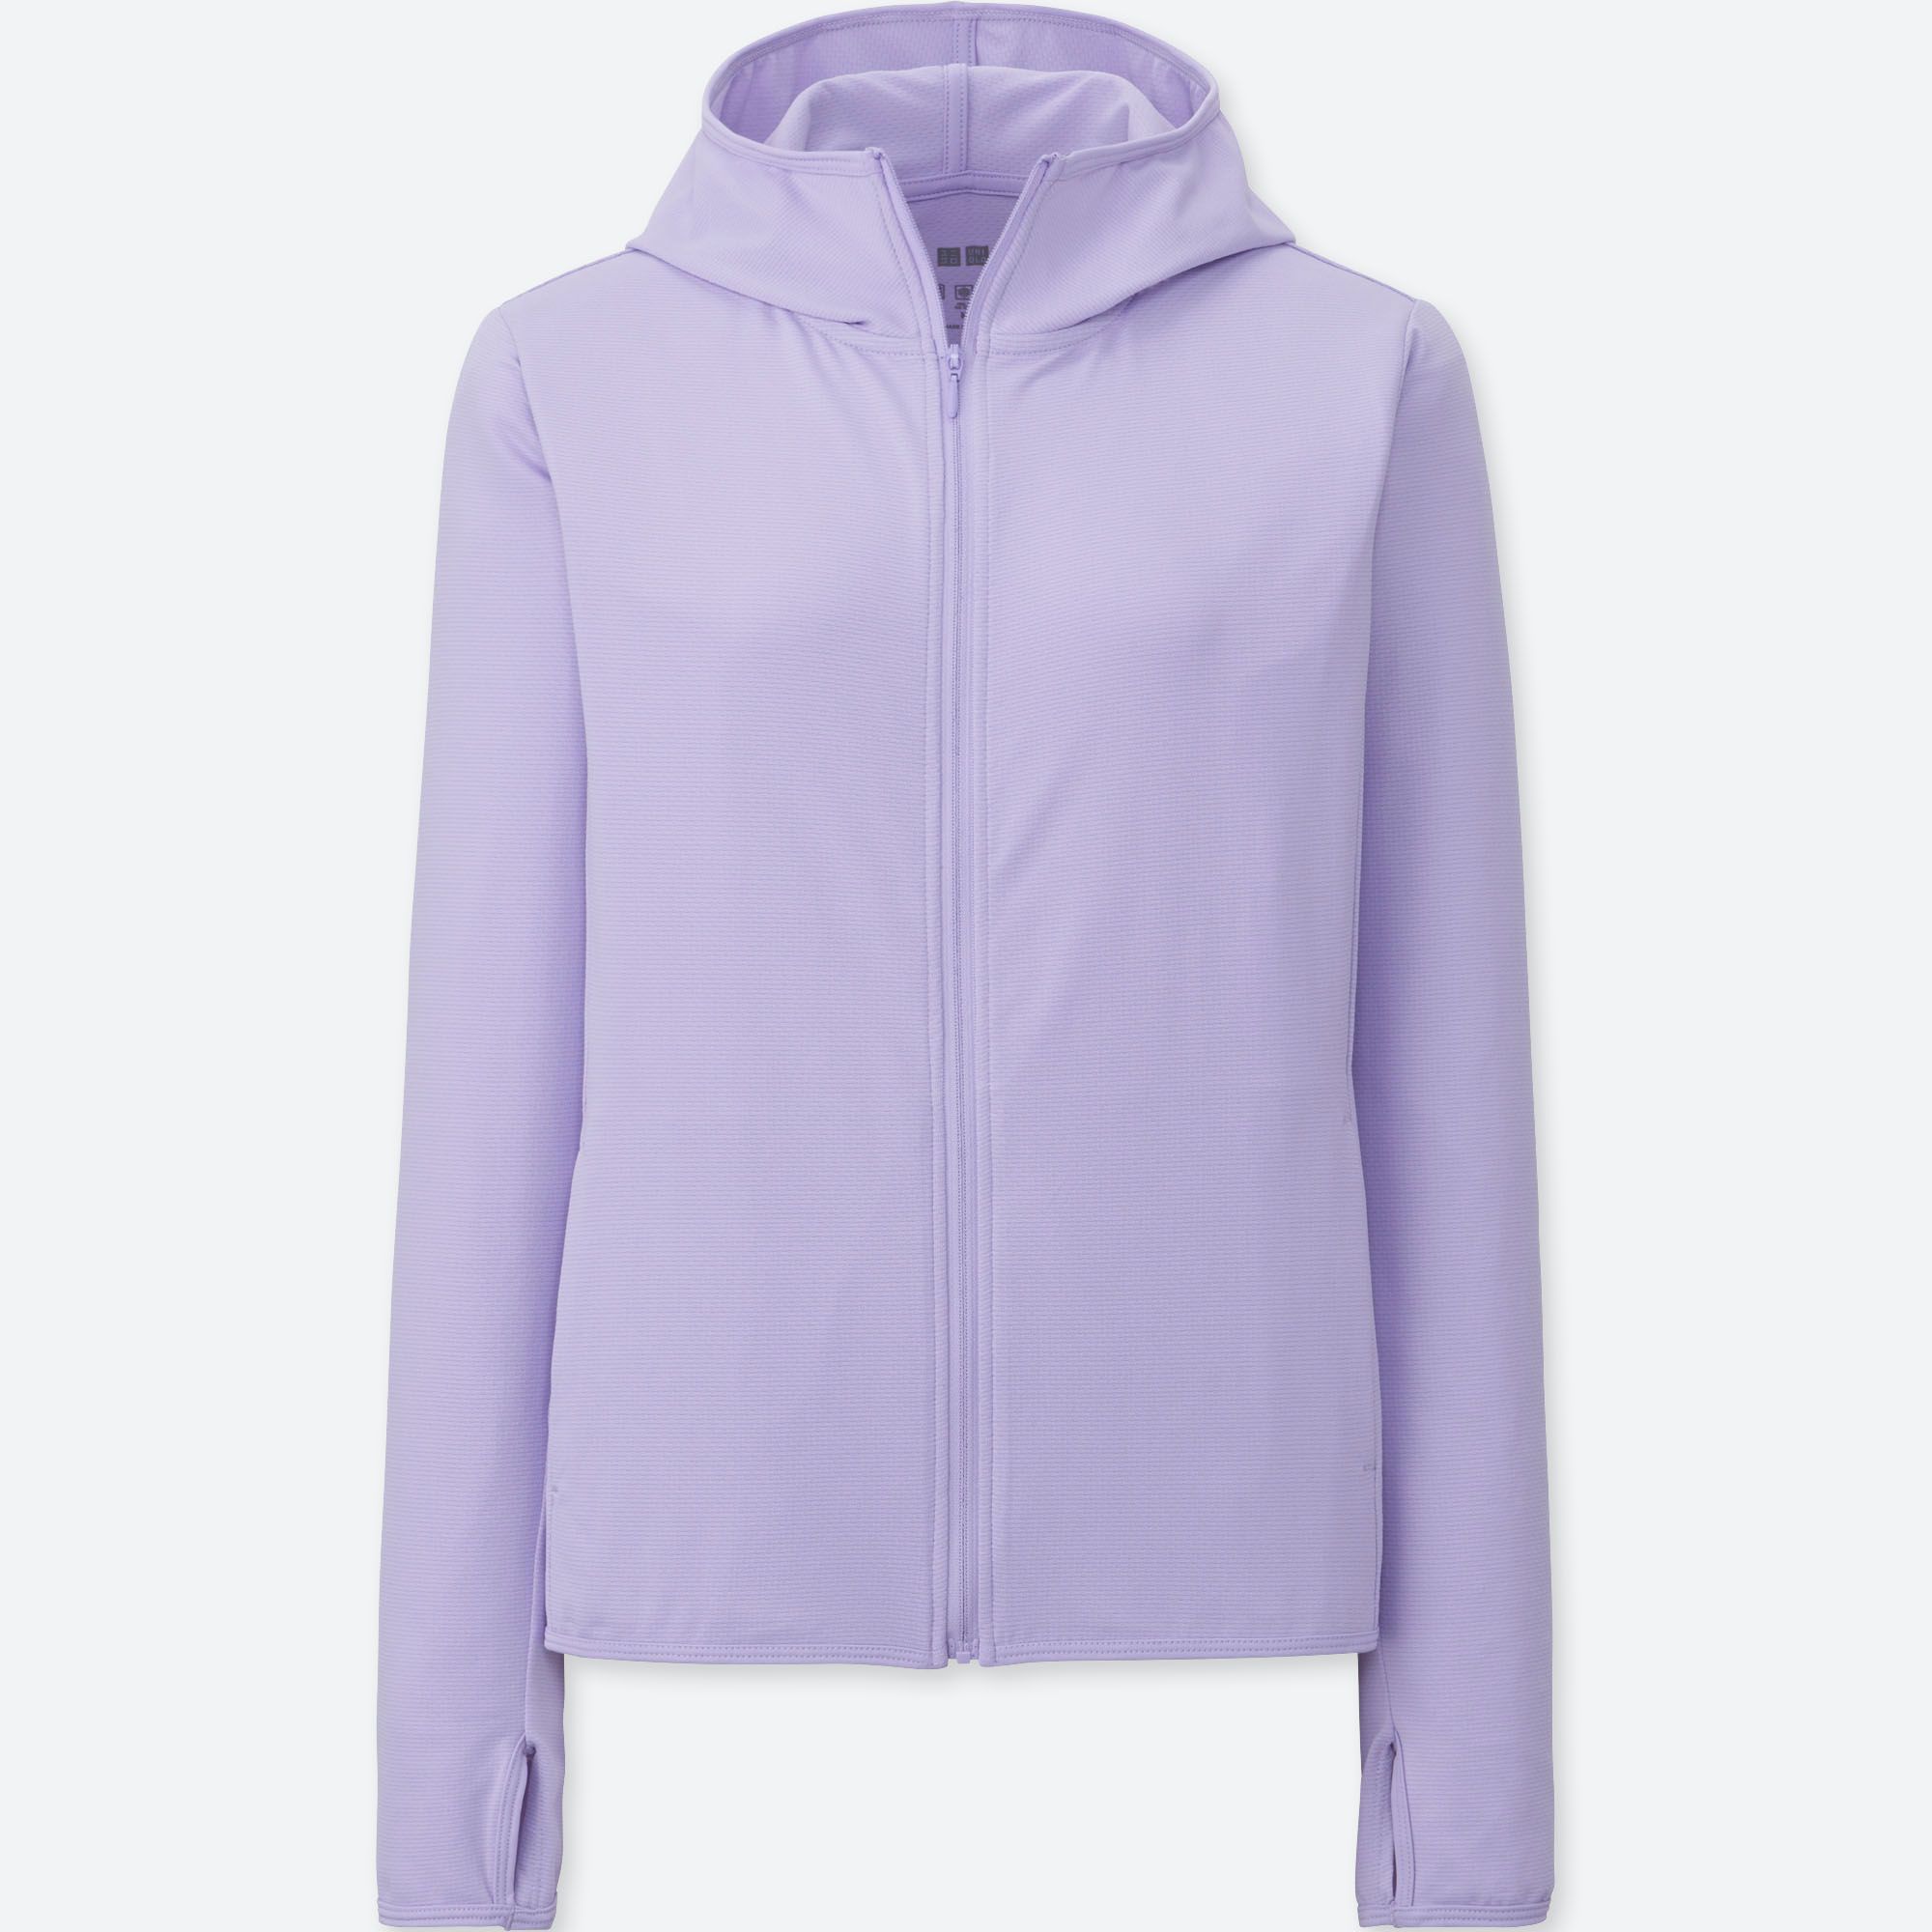 Airism long sleeve uniqlo clothes women color outfits